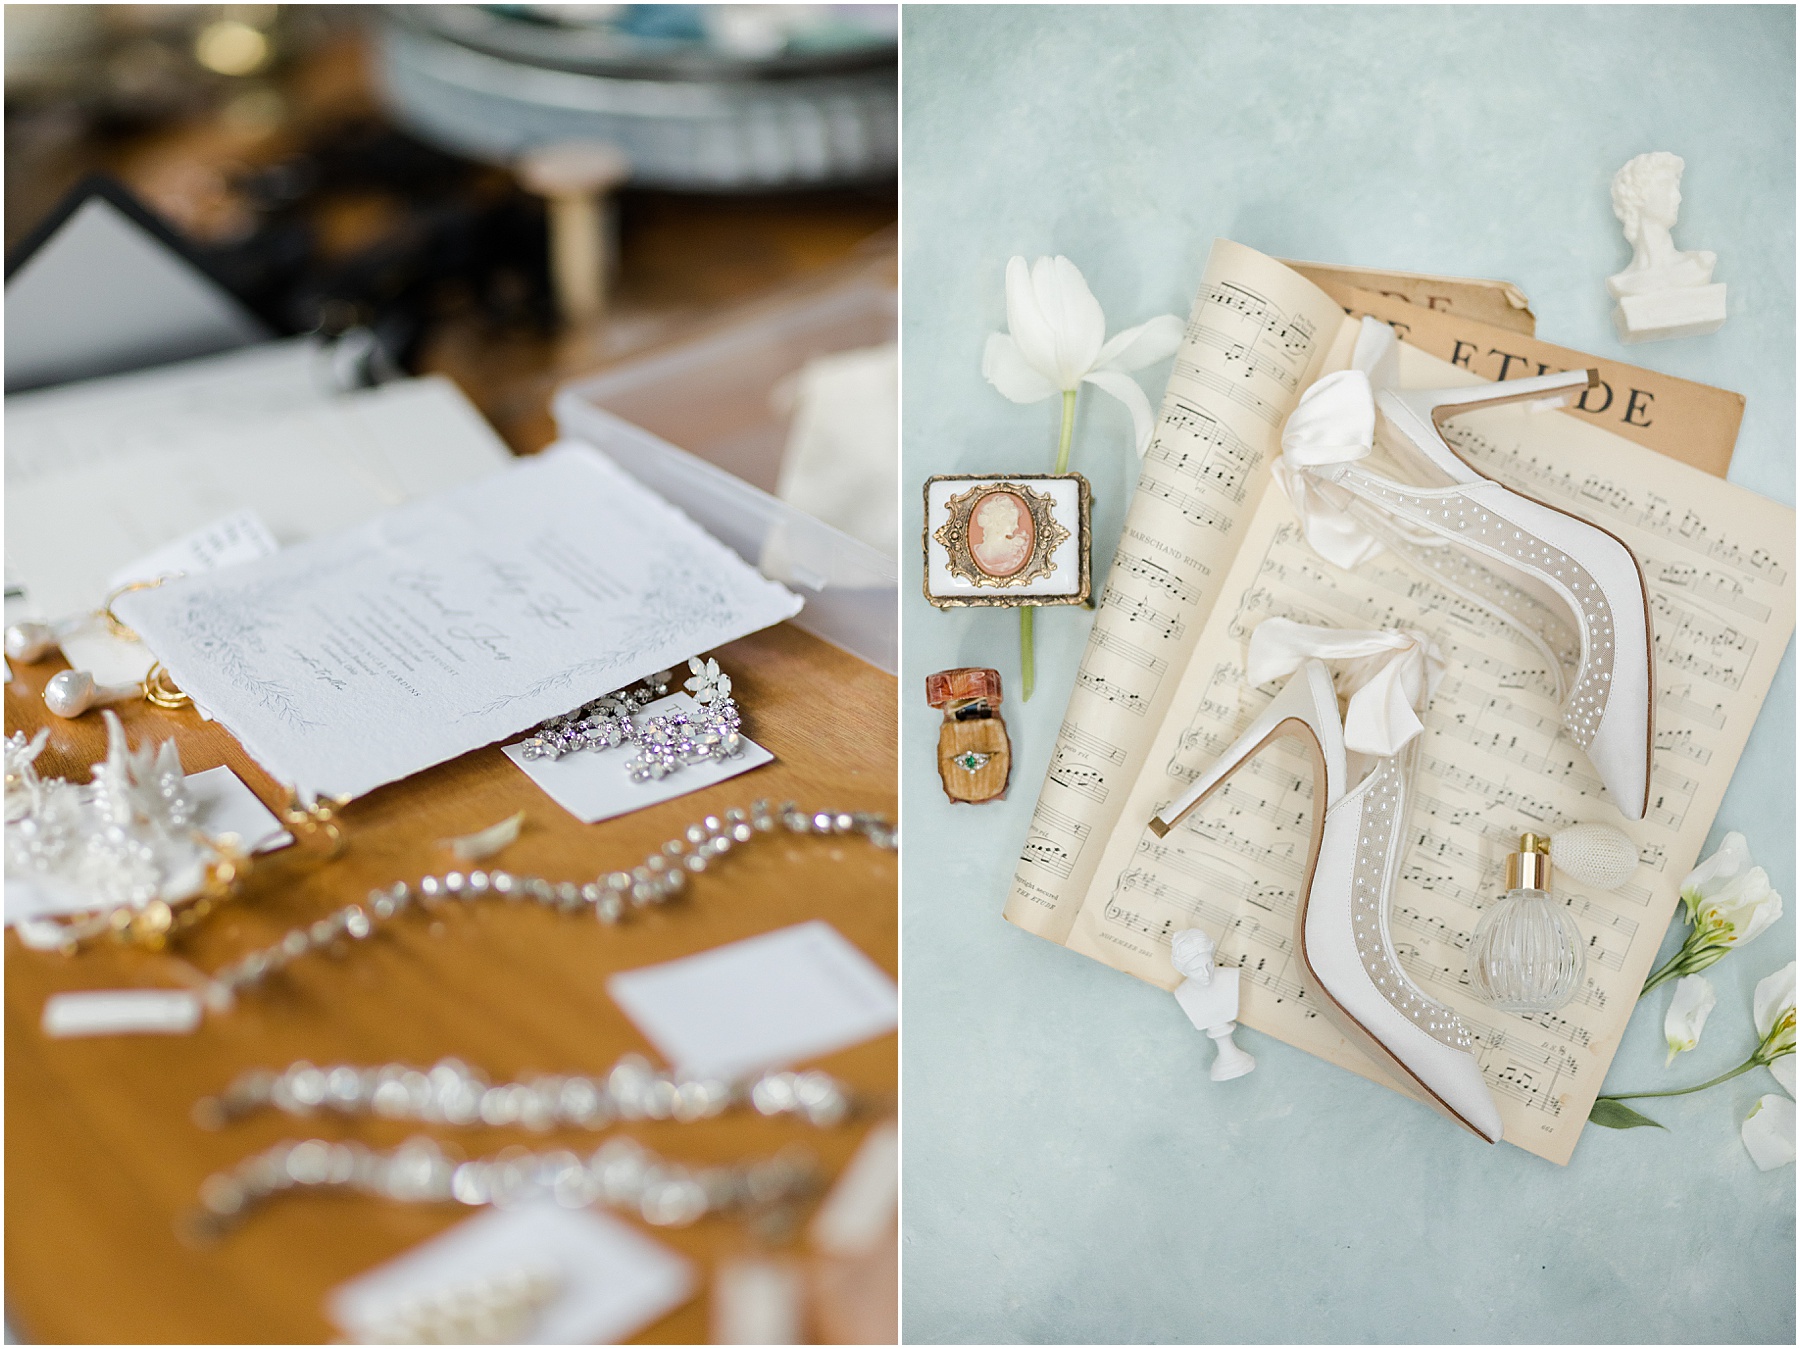 Styled Shoot Details at Wedding Photographer Conference in Ohio 